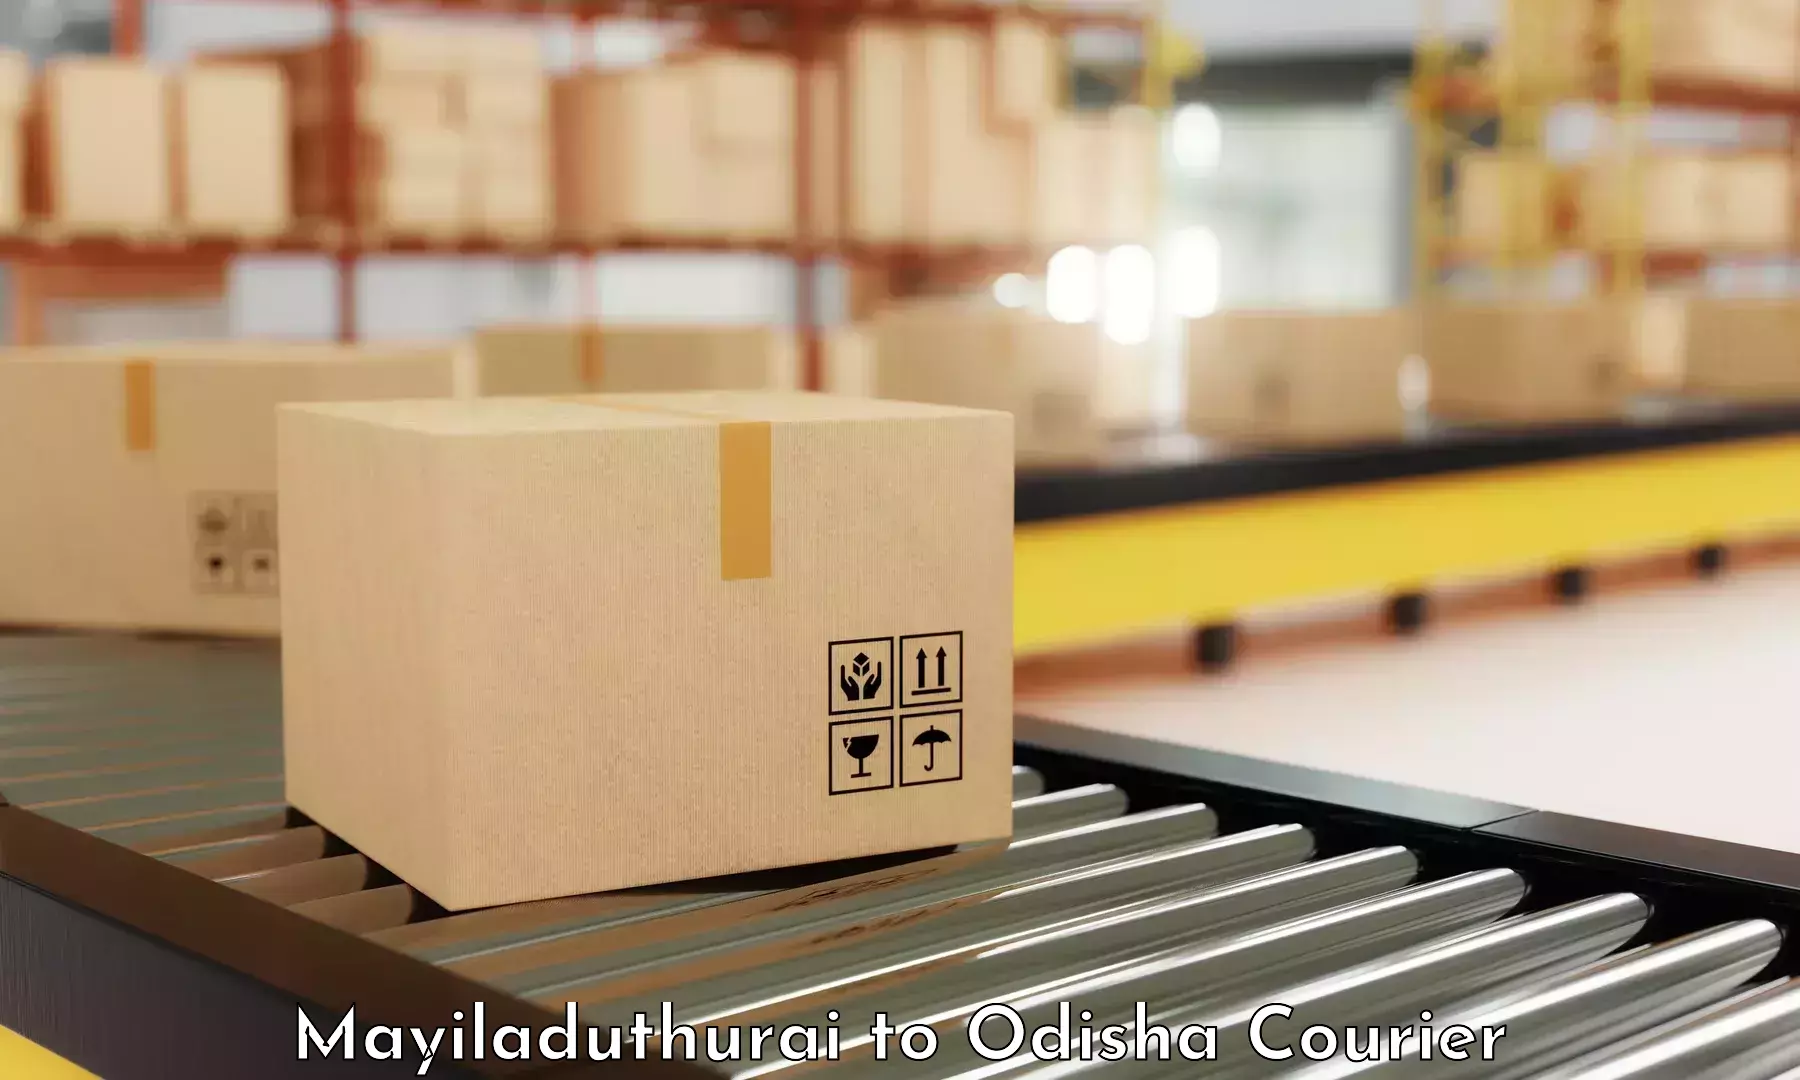 Full-service courier options Mayiladuthurai to Salipur